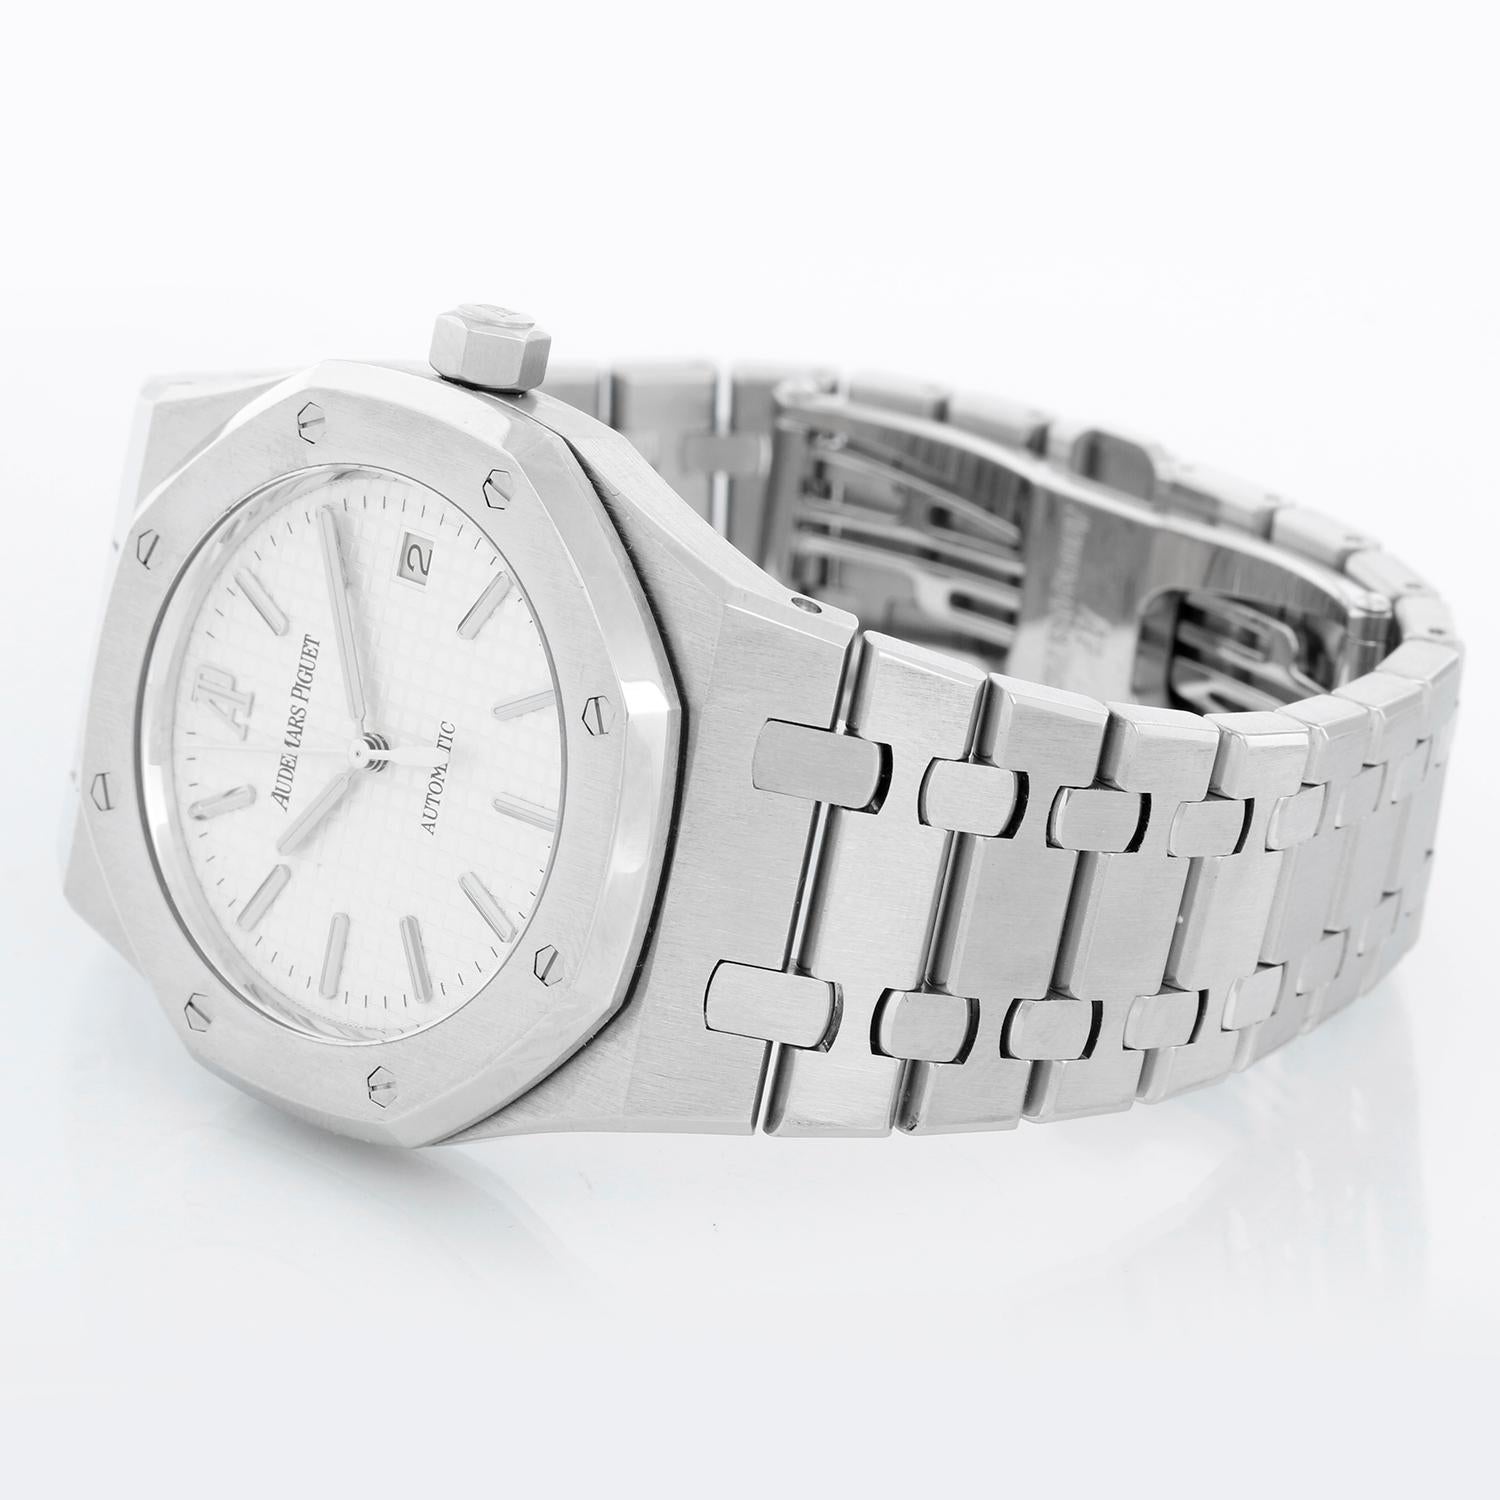 Audemars Piguet Royal Oak Stainless Steel 15300st - Automatic winding. Stainless steel case (39mm). White Dial. Stainless Steel Audemars Piguet bracelet; fits a 7 1/2 inch wrist. Service papers from 3/22, have over 1-1/2 years left on warranty.